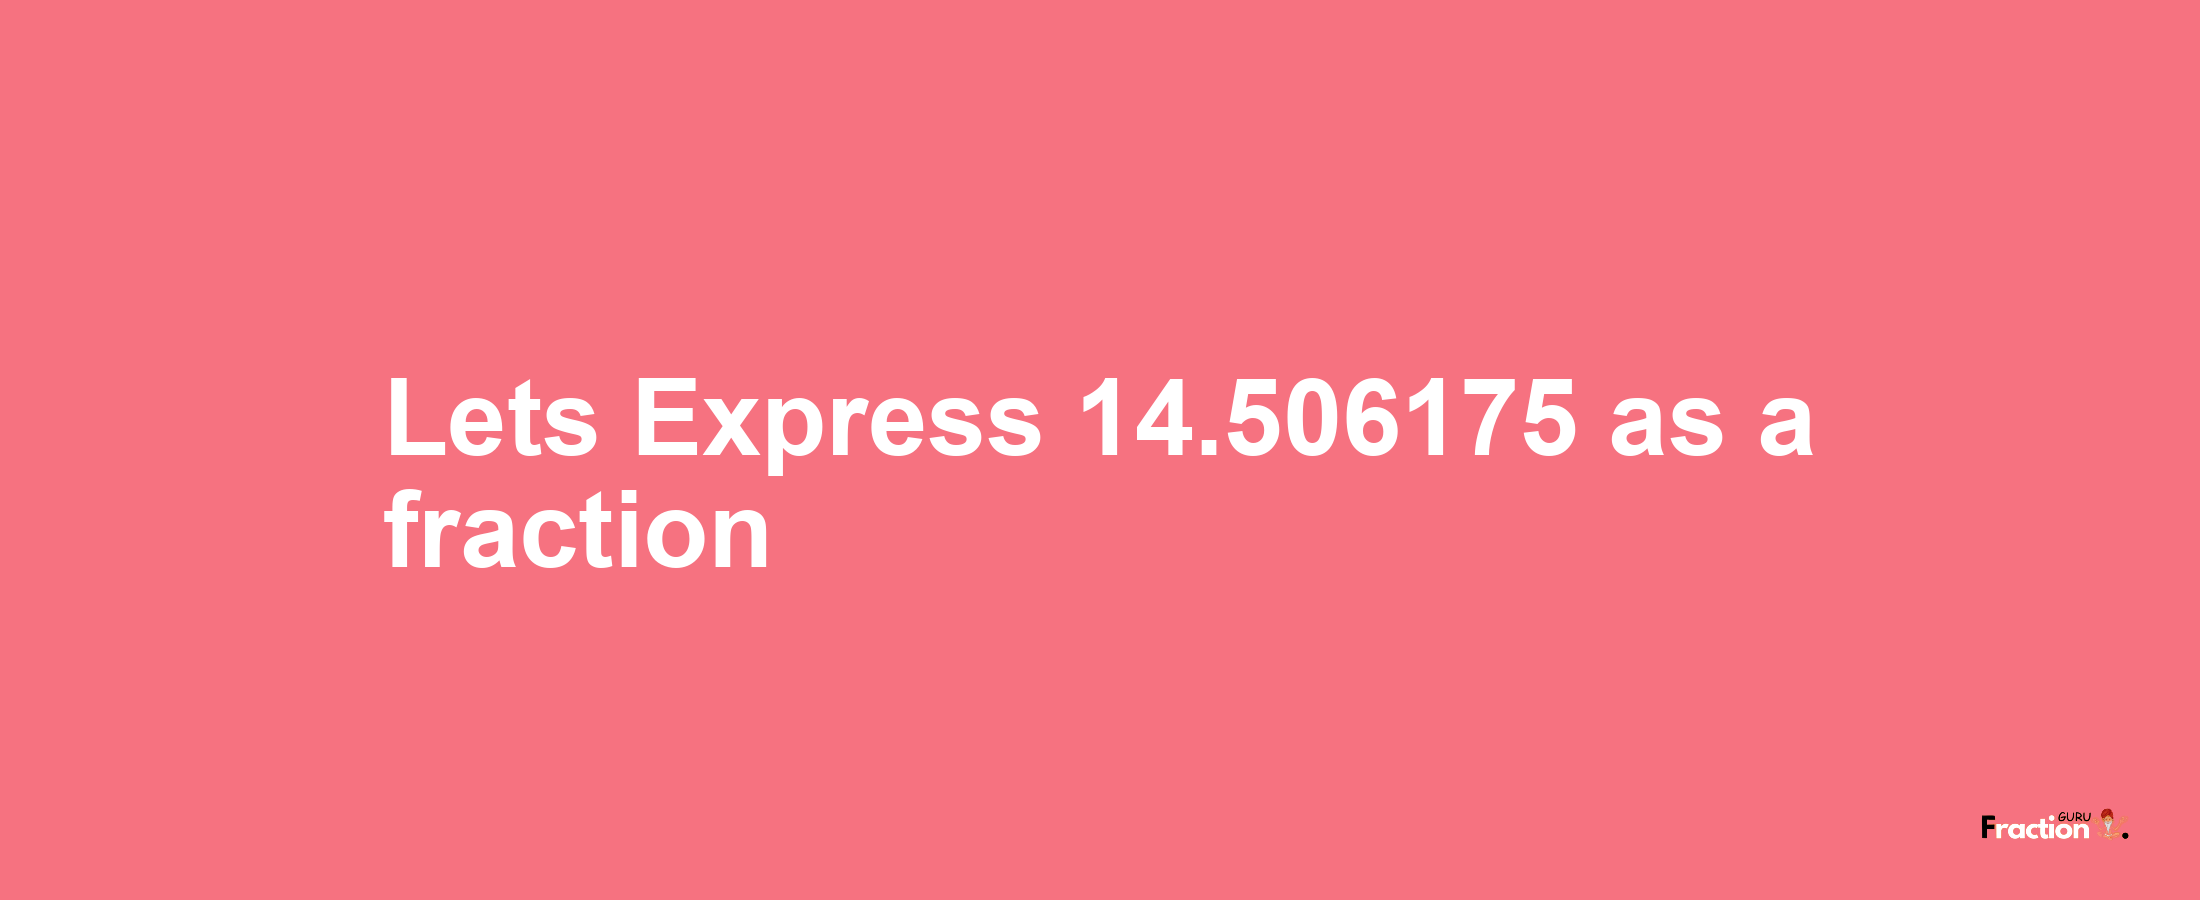 Lets Express 14.506175 as afraction